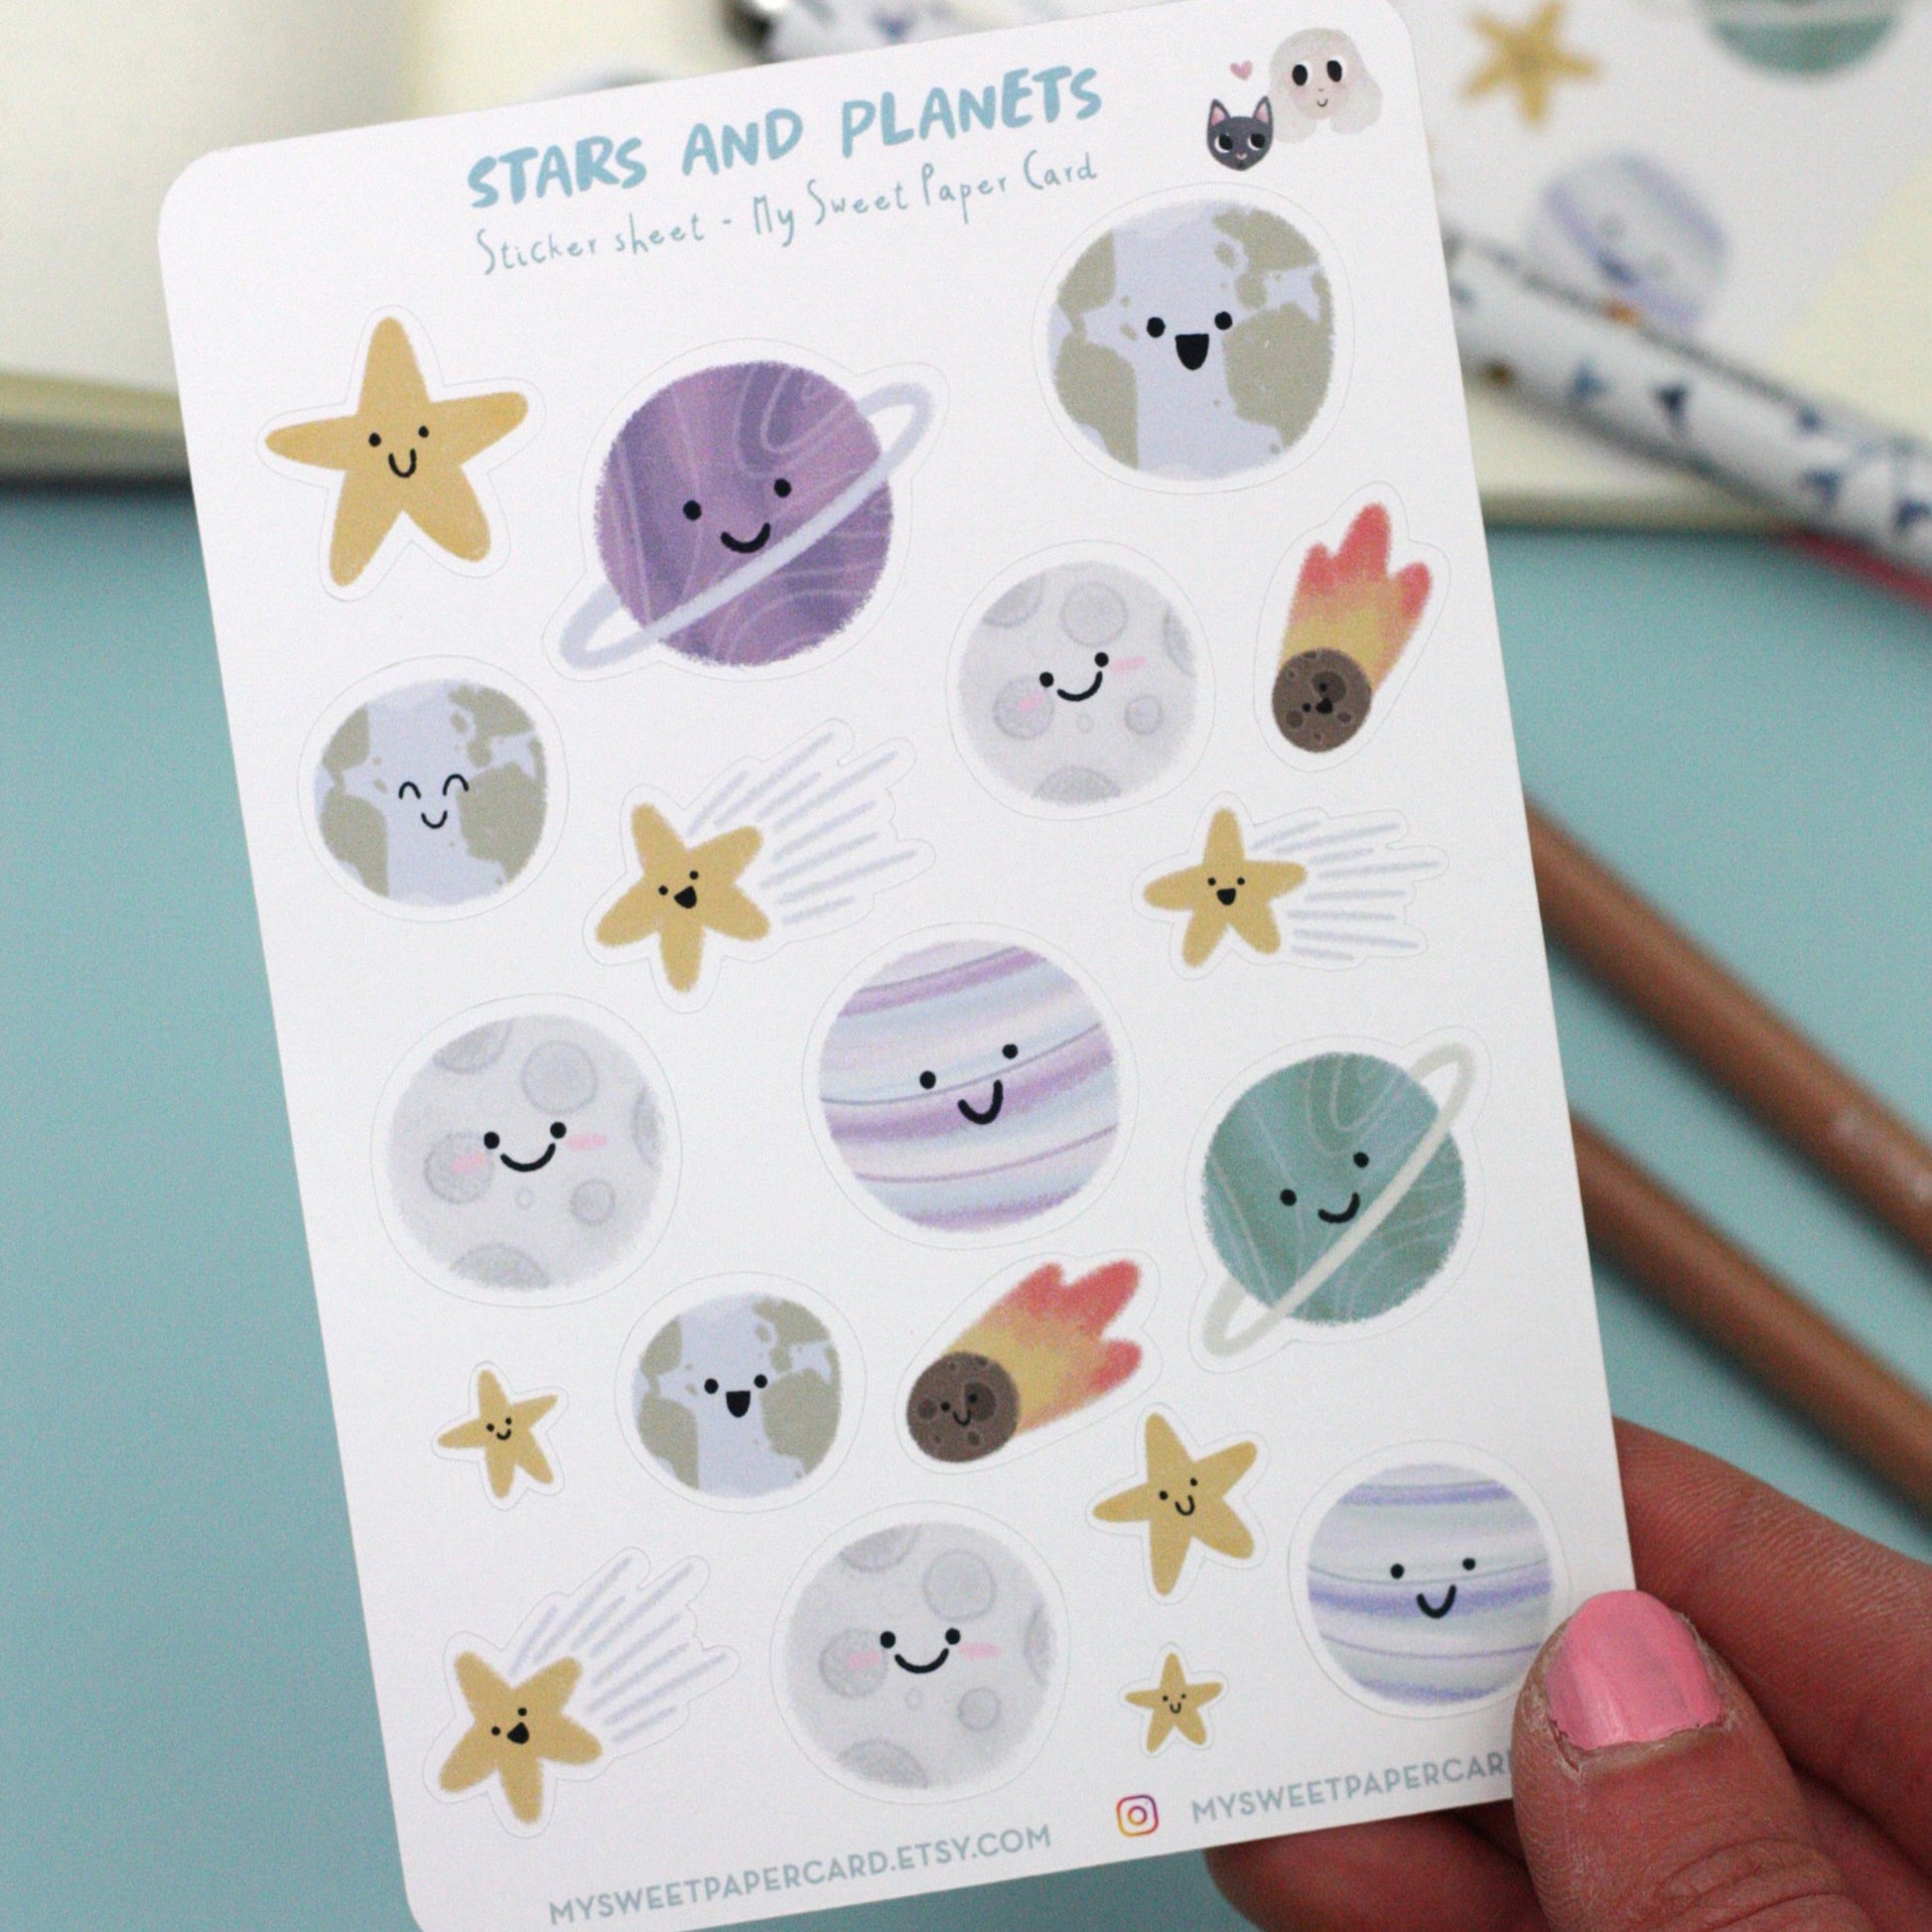 cute planet stickers for your planner